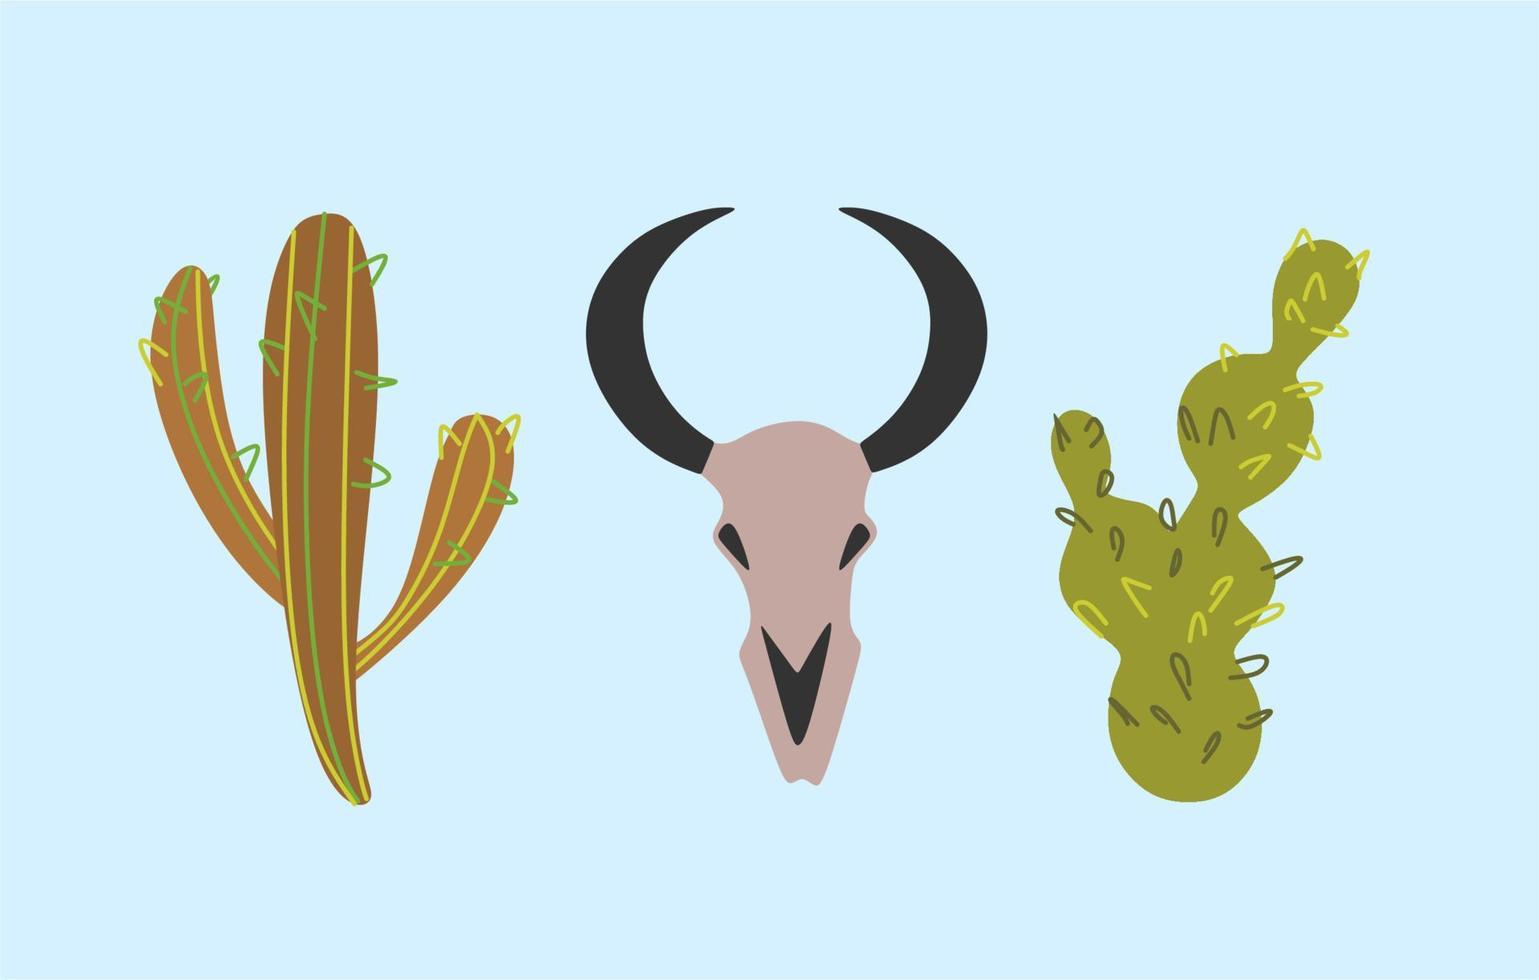 Retro illustration - set of elements. Cowboy mood. A set of drawings on the theme of the wild west. A two types of cacti, a bull skull. vector